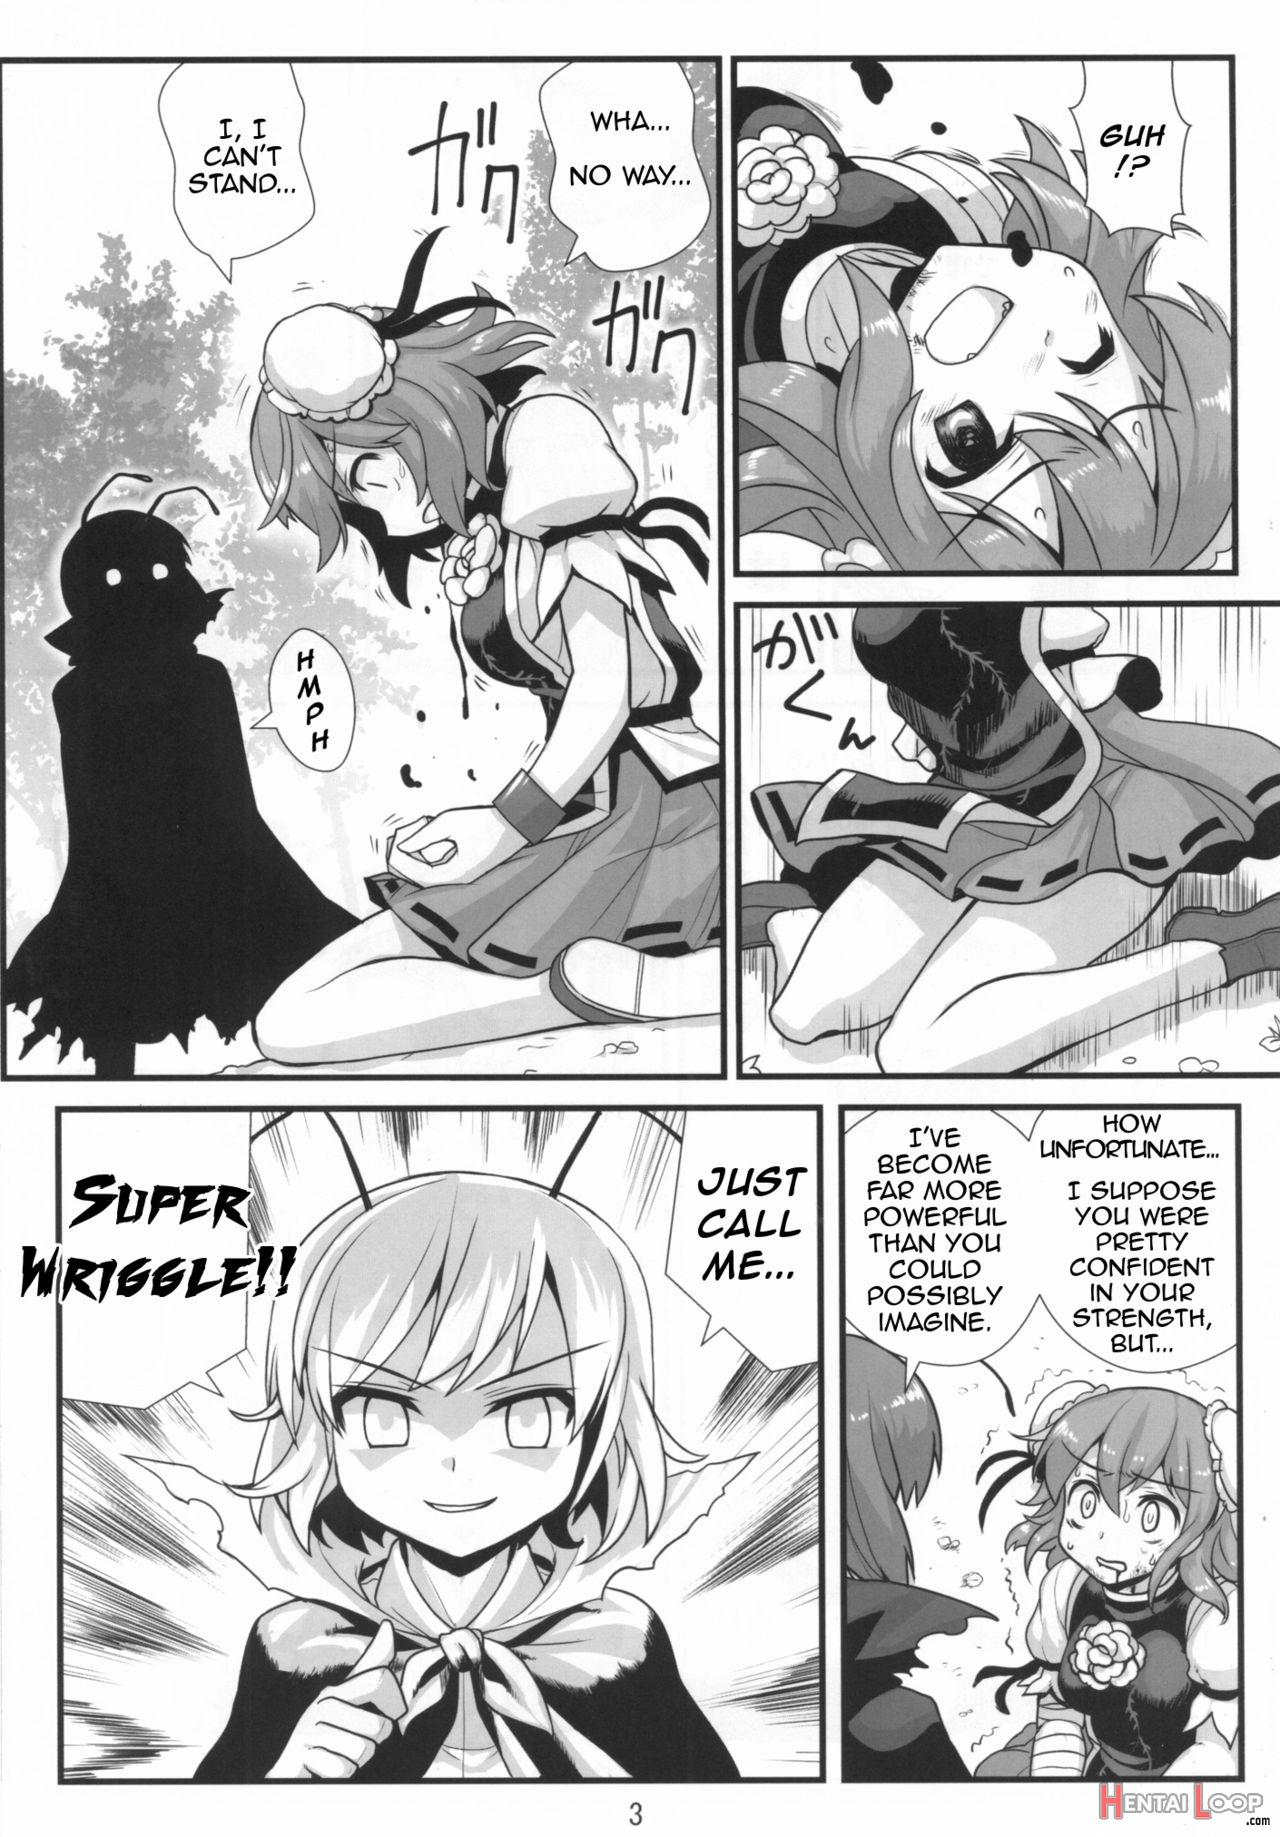 Super Wriggle Hermit page 4